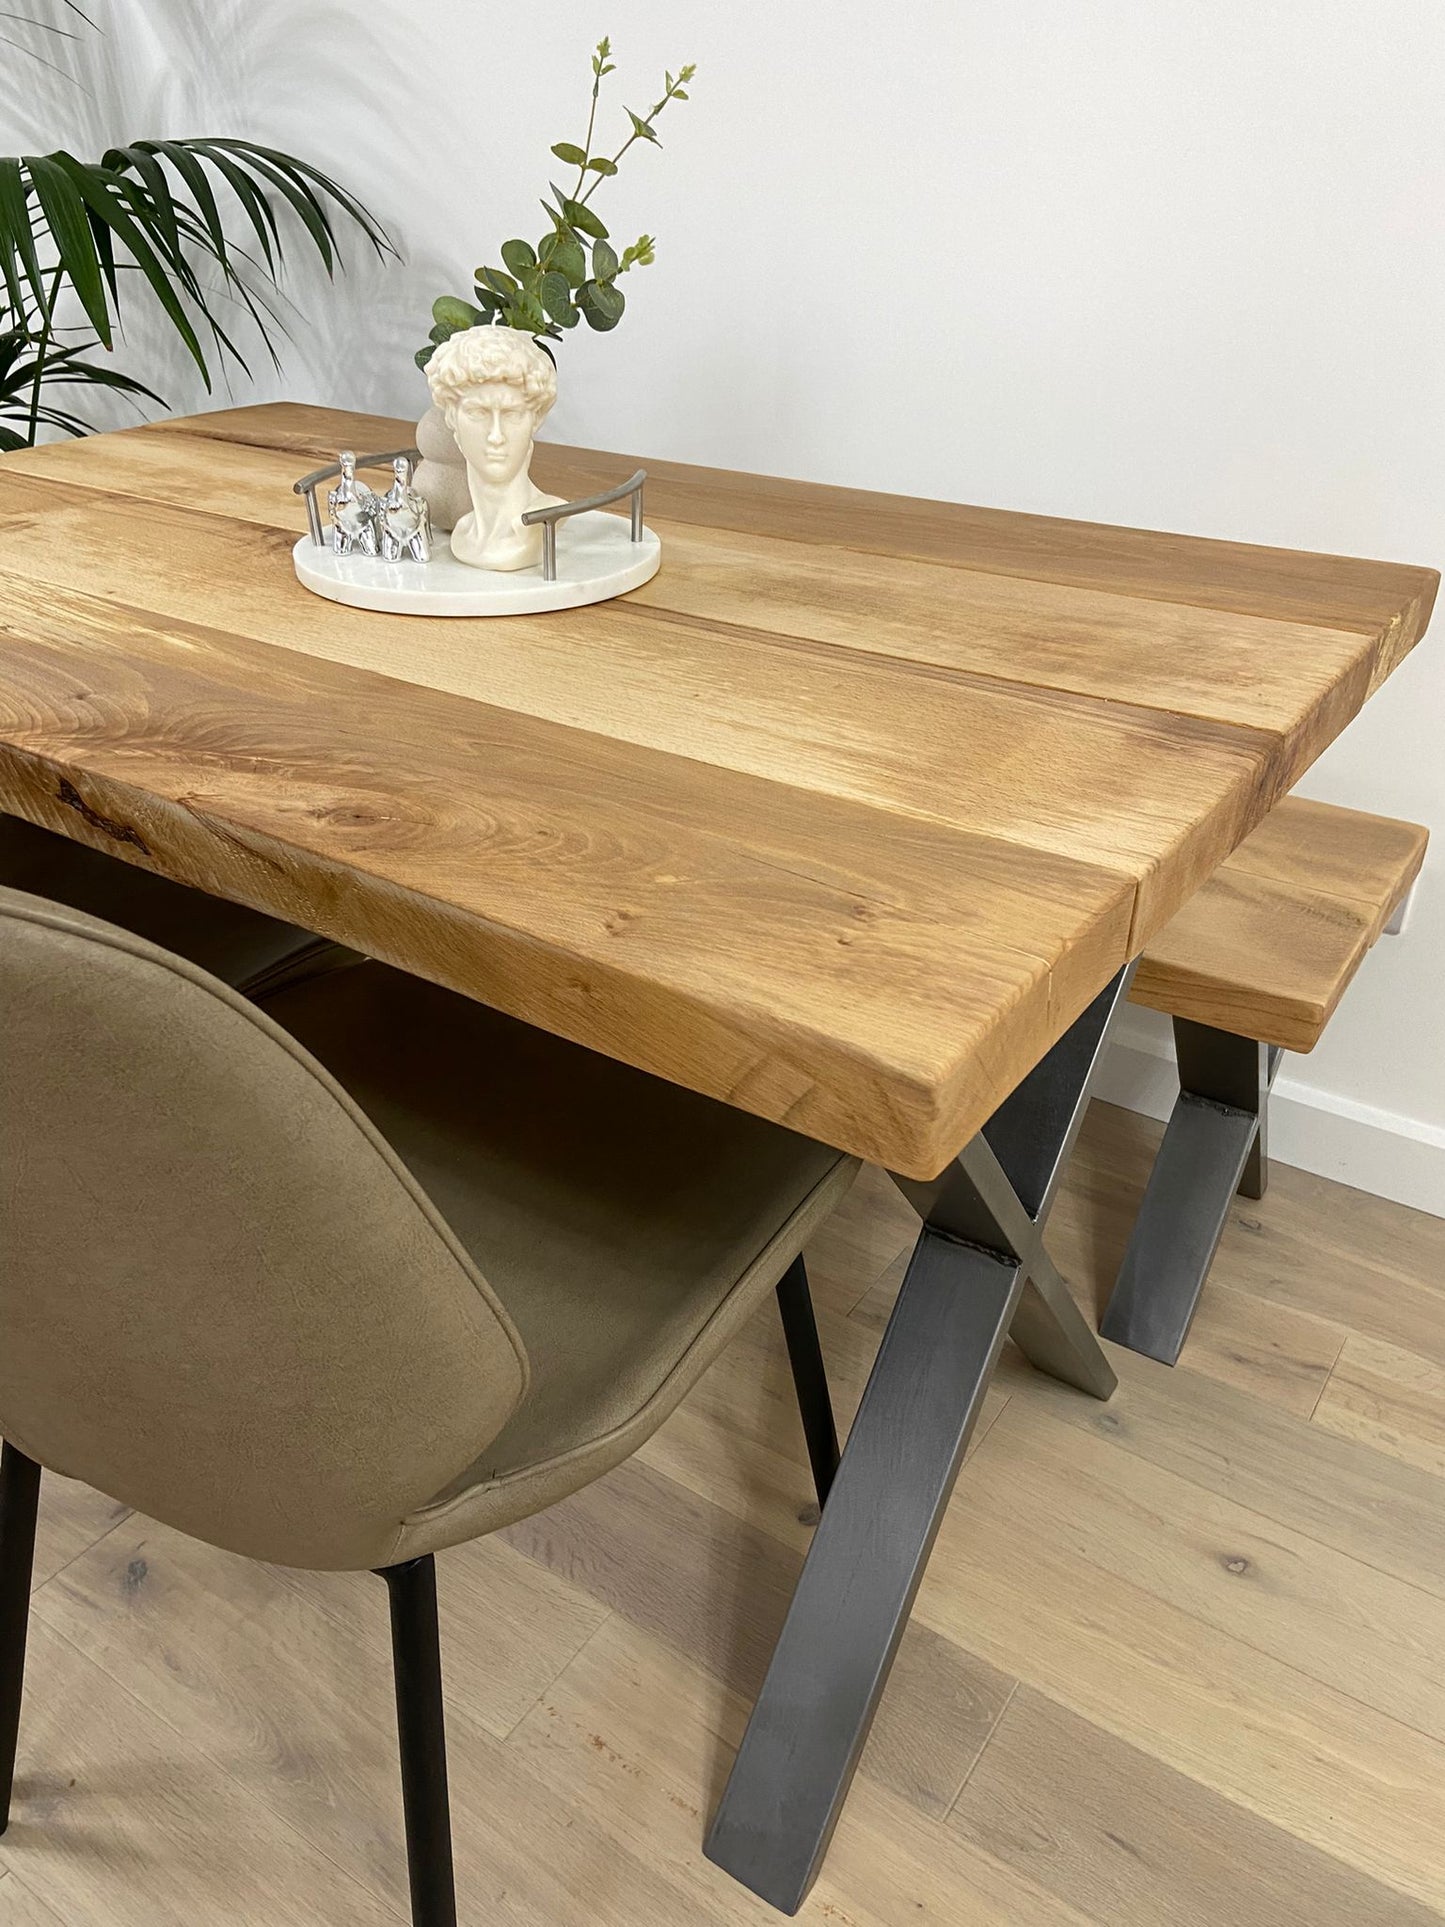 Solid oak table with X shape legs